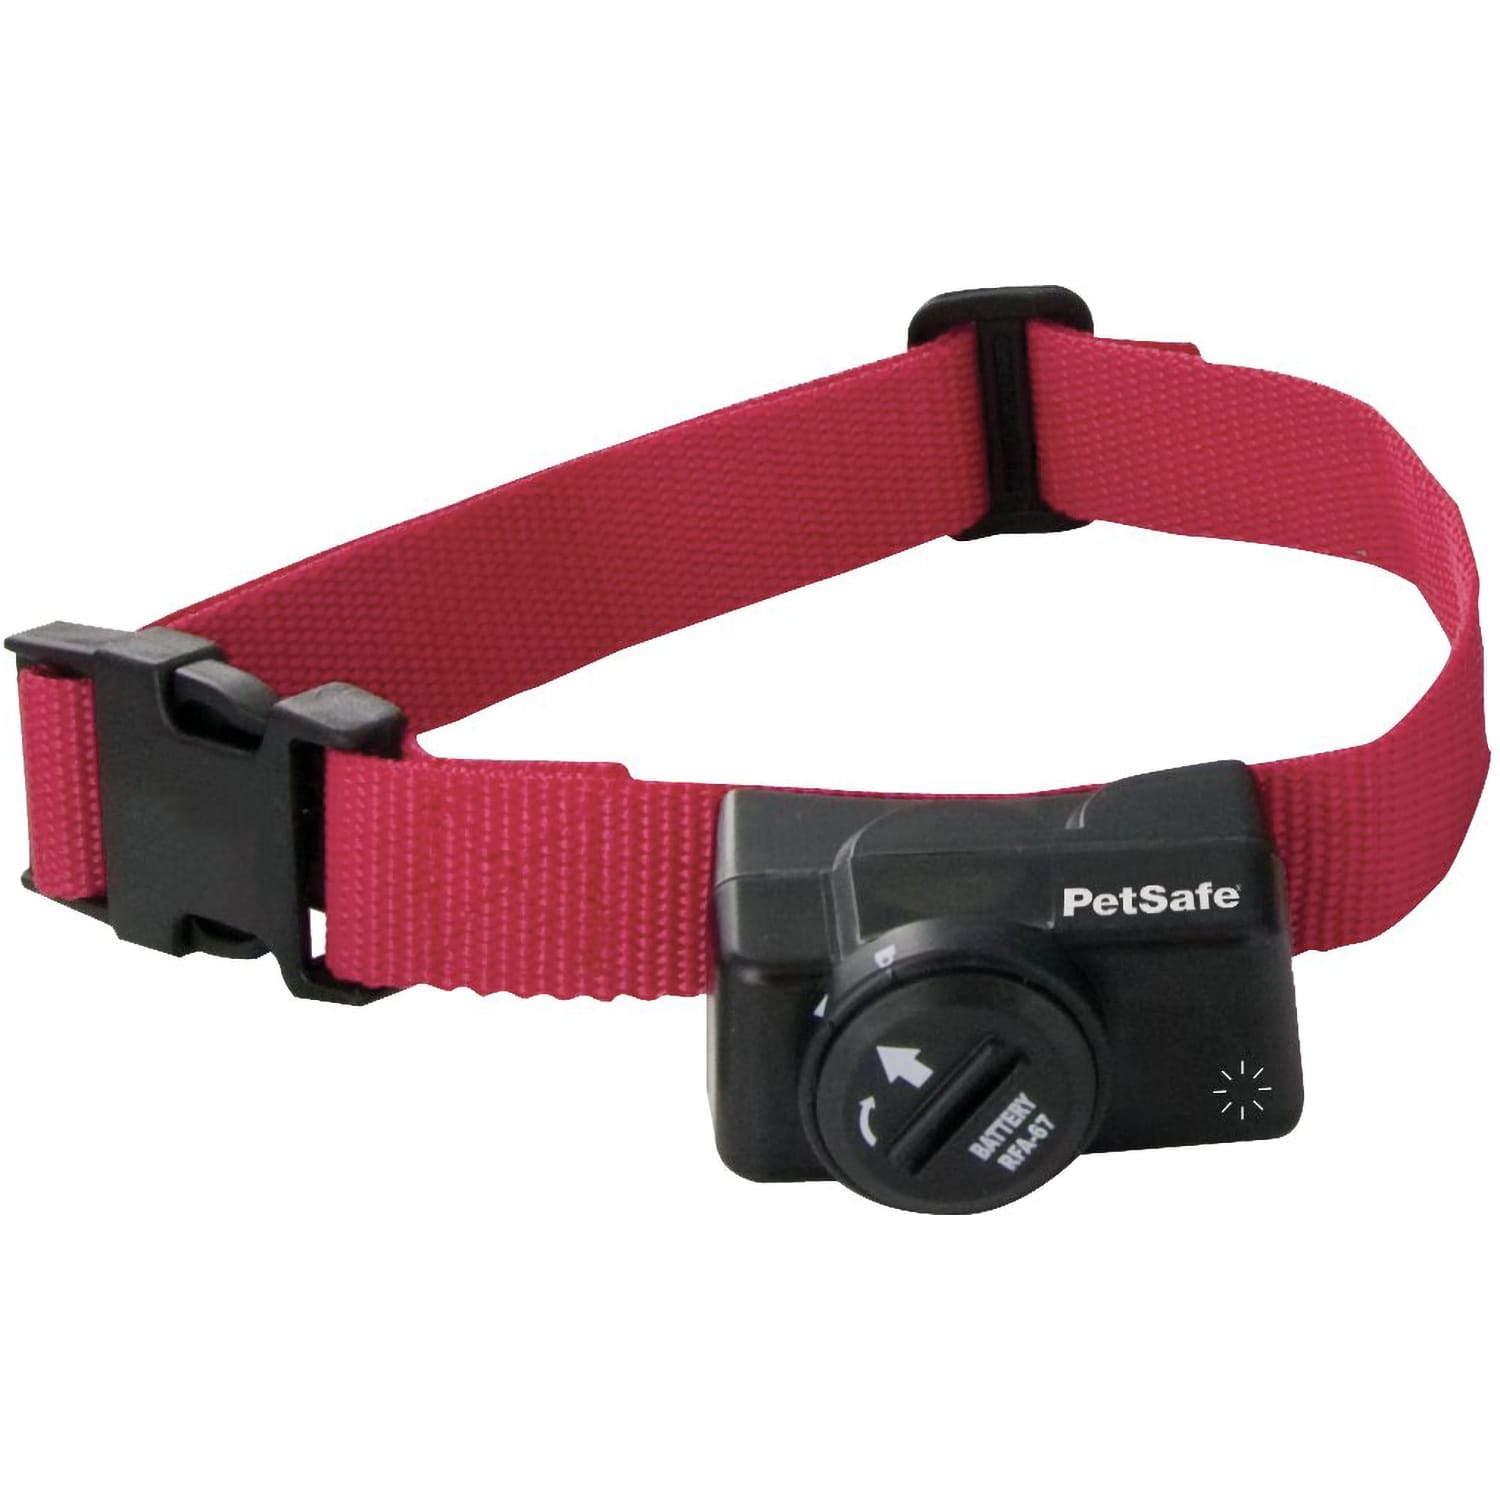 PetSafe Wireless Pet Containment System™